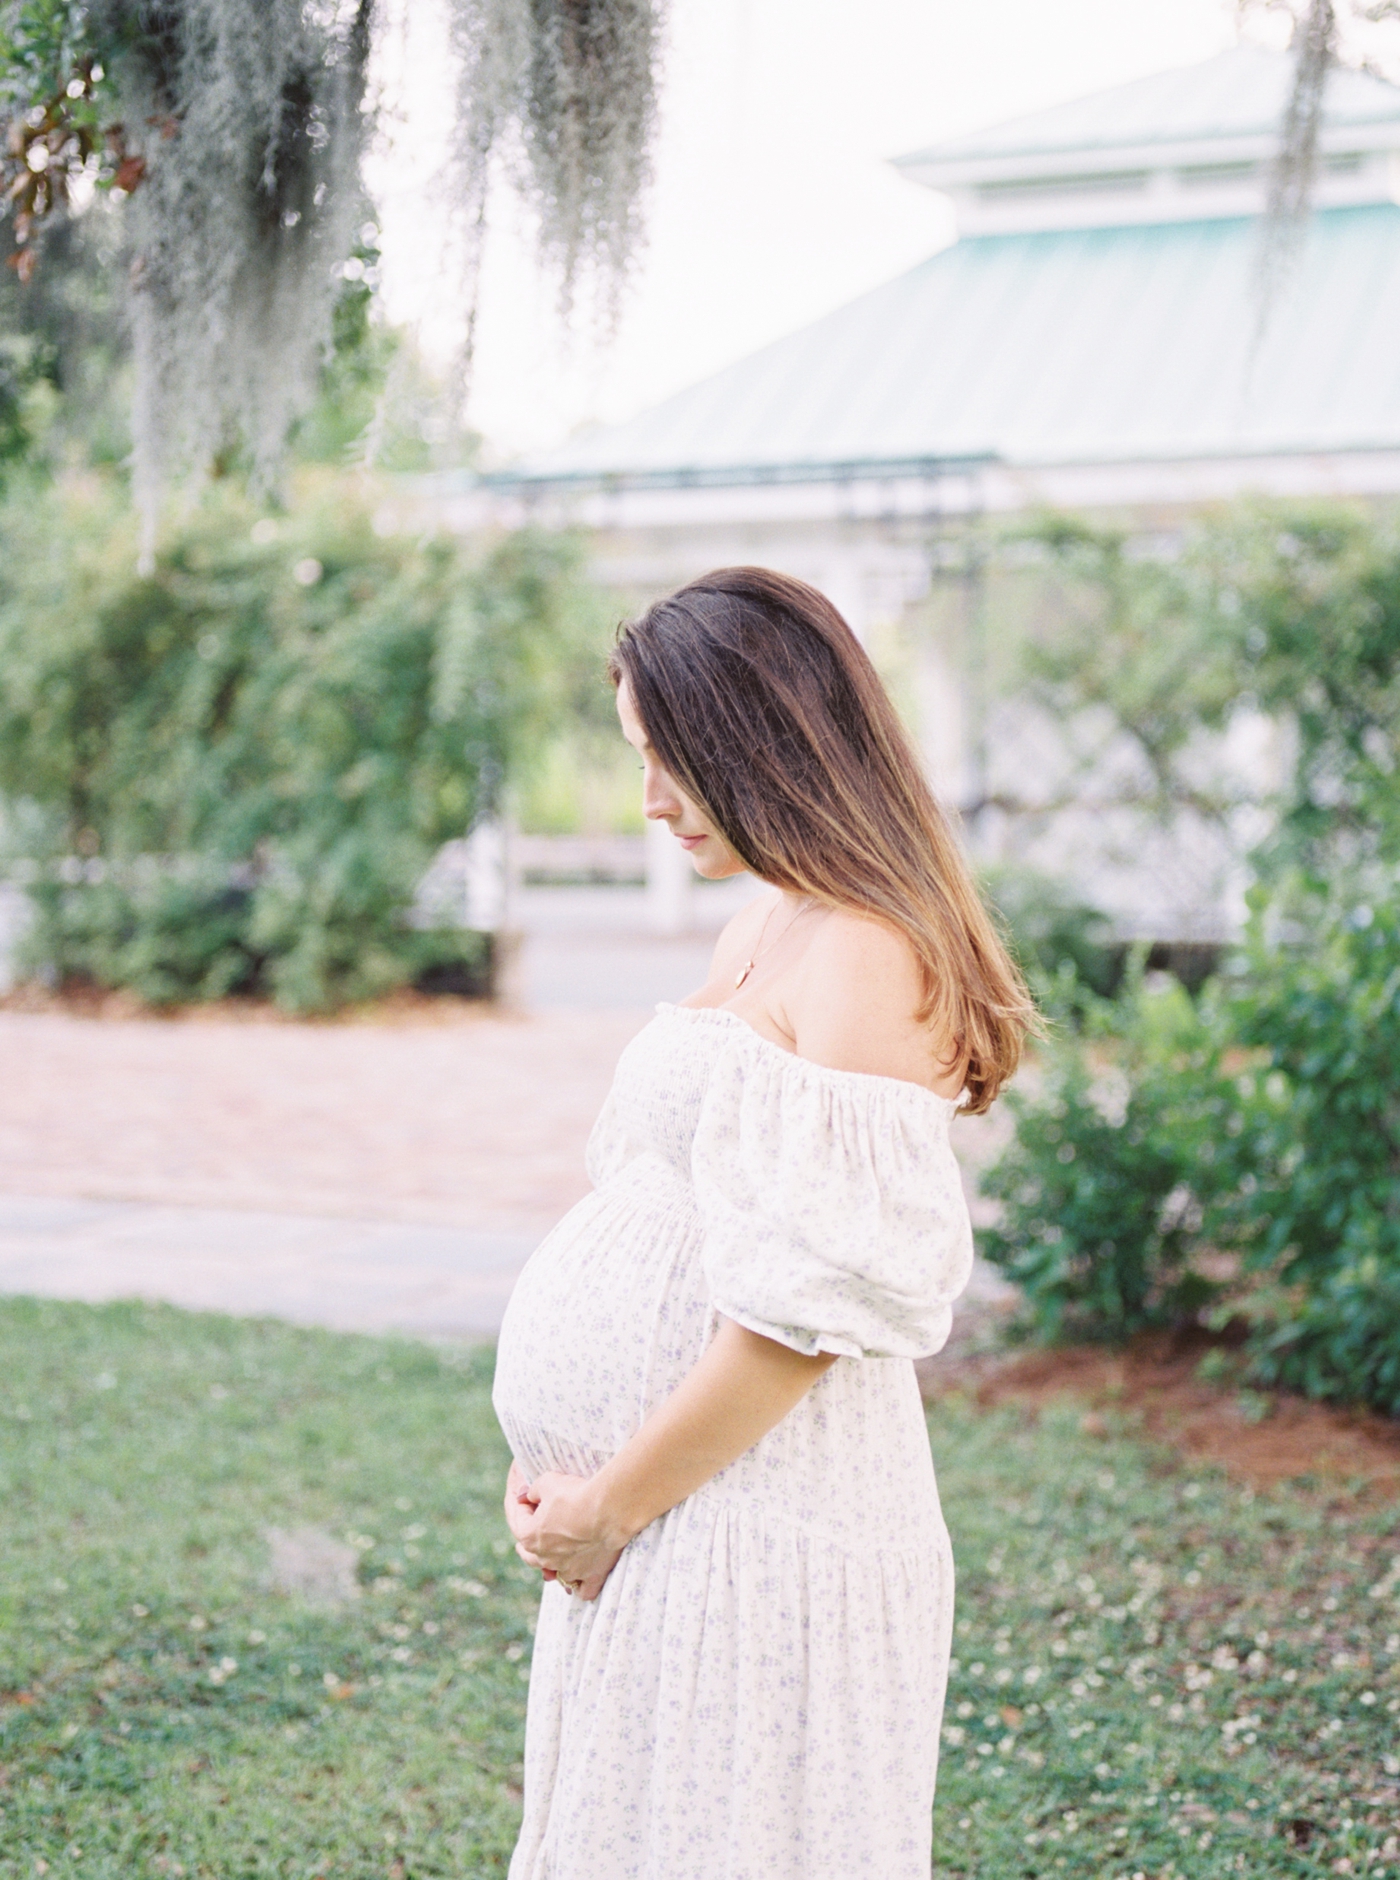 Mom to be in floral dress cradling her belly | Photo by Caitlyn Motycka Photography.